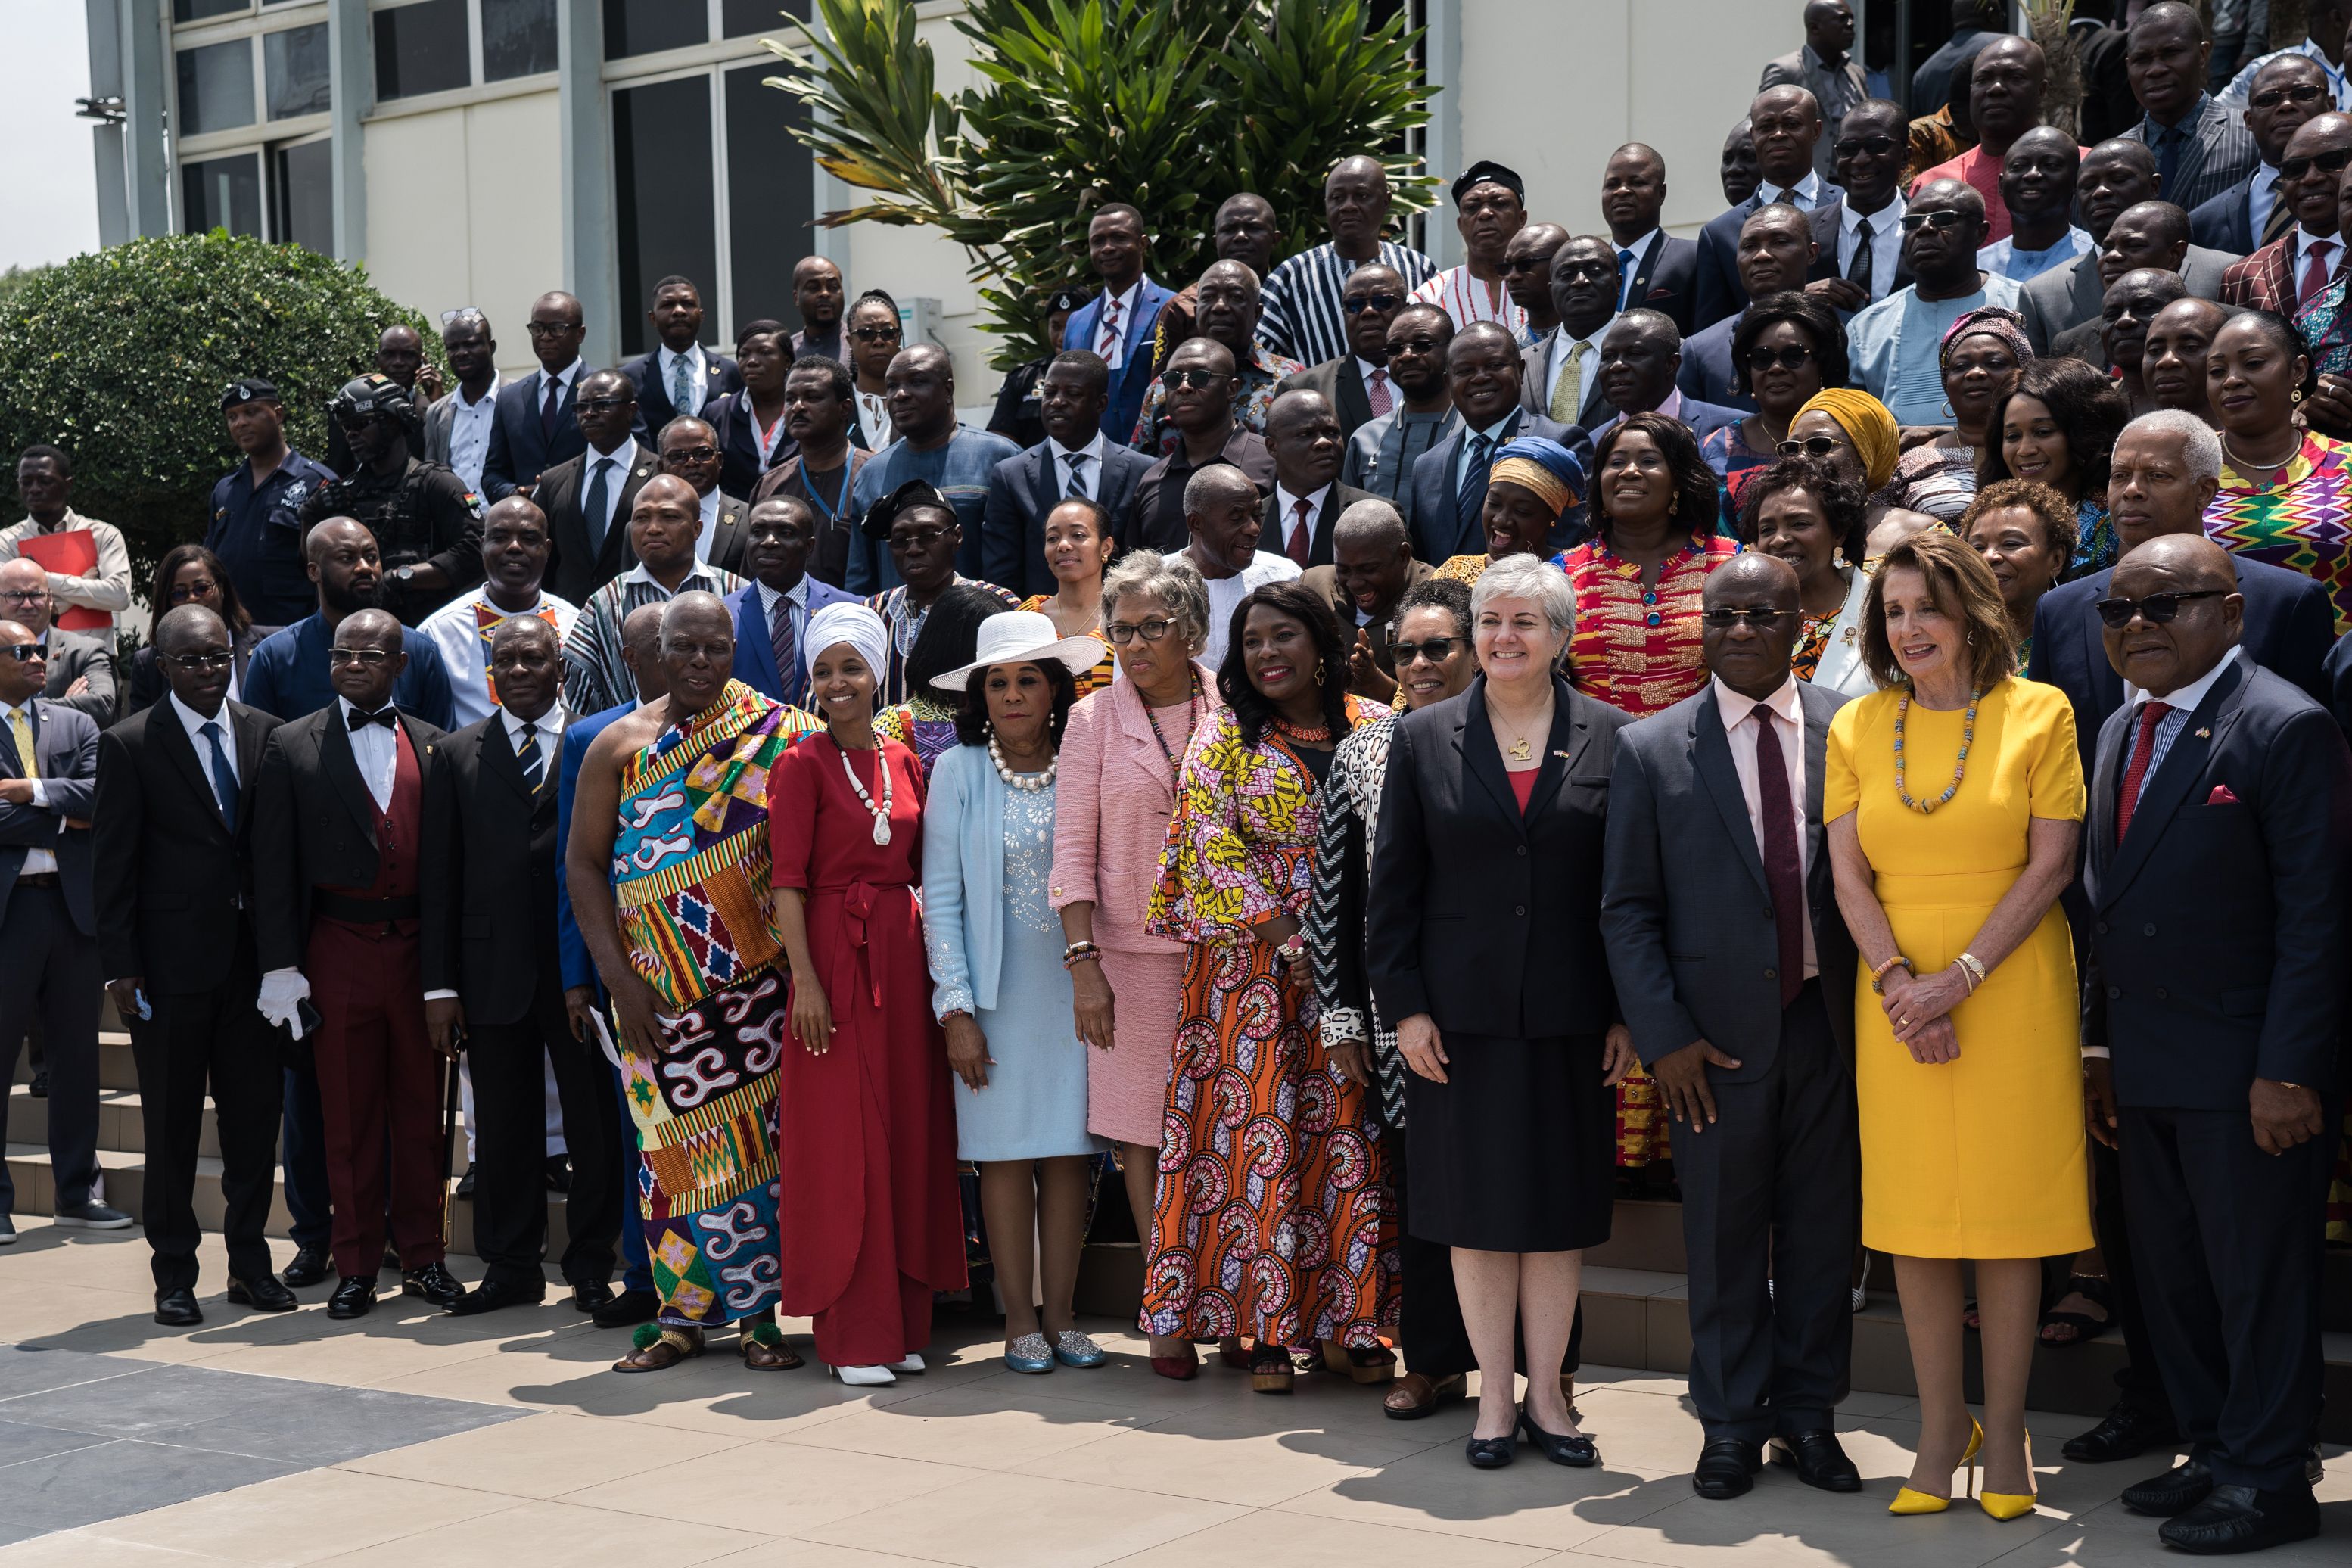 US Speaker of the House Nancy Pelosi (2nd R), Speaker of Ghana's Parliament Mike Aaron Oquaye (R) and US Representative Ilhan Omar (5th L) pose for a family picture with members of Parliament in front of the Ghana's Parliament in Accra, on July 31, 2019 during a three-day visit to the country to mark the 400 years anniversary since the first slave shipment left the Ghana's coast for United States. - US House Speaker Nancy Pelosi condemned the "grave evil" of slavery in a speech to Ghana's parliament marking 400 years since the first shipment of enslaved Africans to America. Pelosi was leading a delegation including members of the Congressional Black Caucus to the West African country, four centuries after the first slave ship arrived in Jamestown, Virginia from the continent. (Photo by Natalija GORMALOVA / AFP)        (Photo credit should read NATALIJA GORMALOVA/AFP/Getty Images)